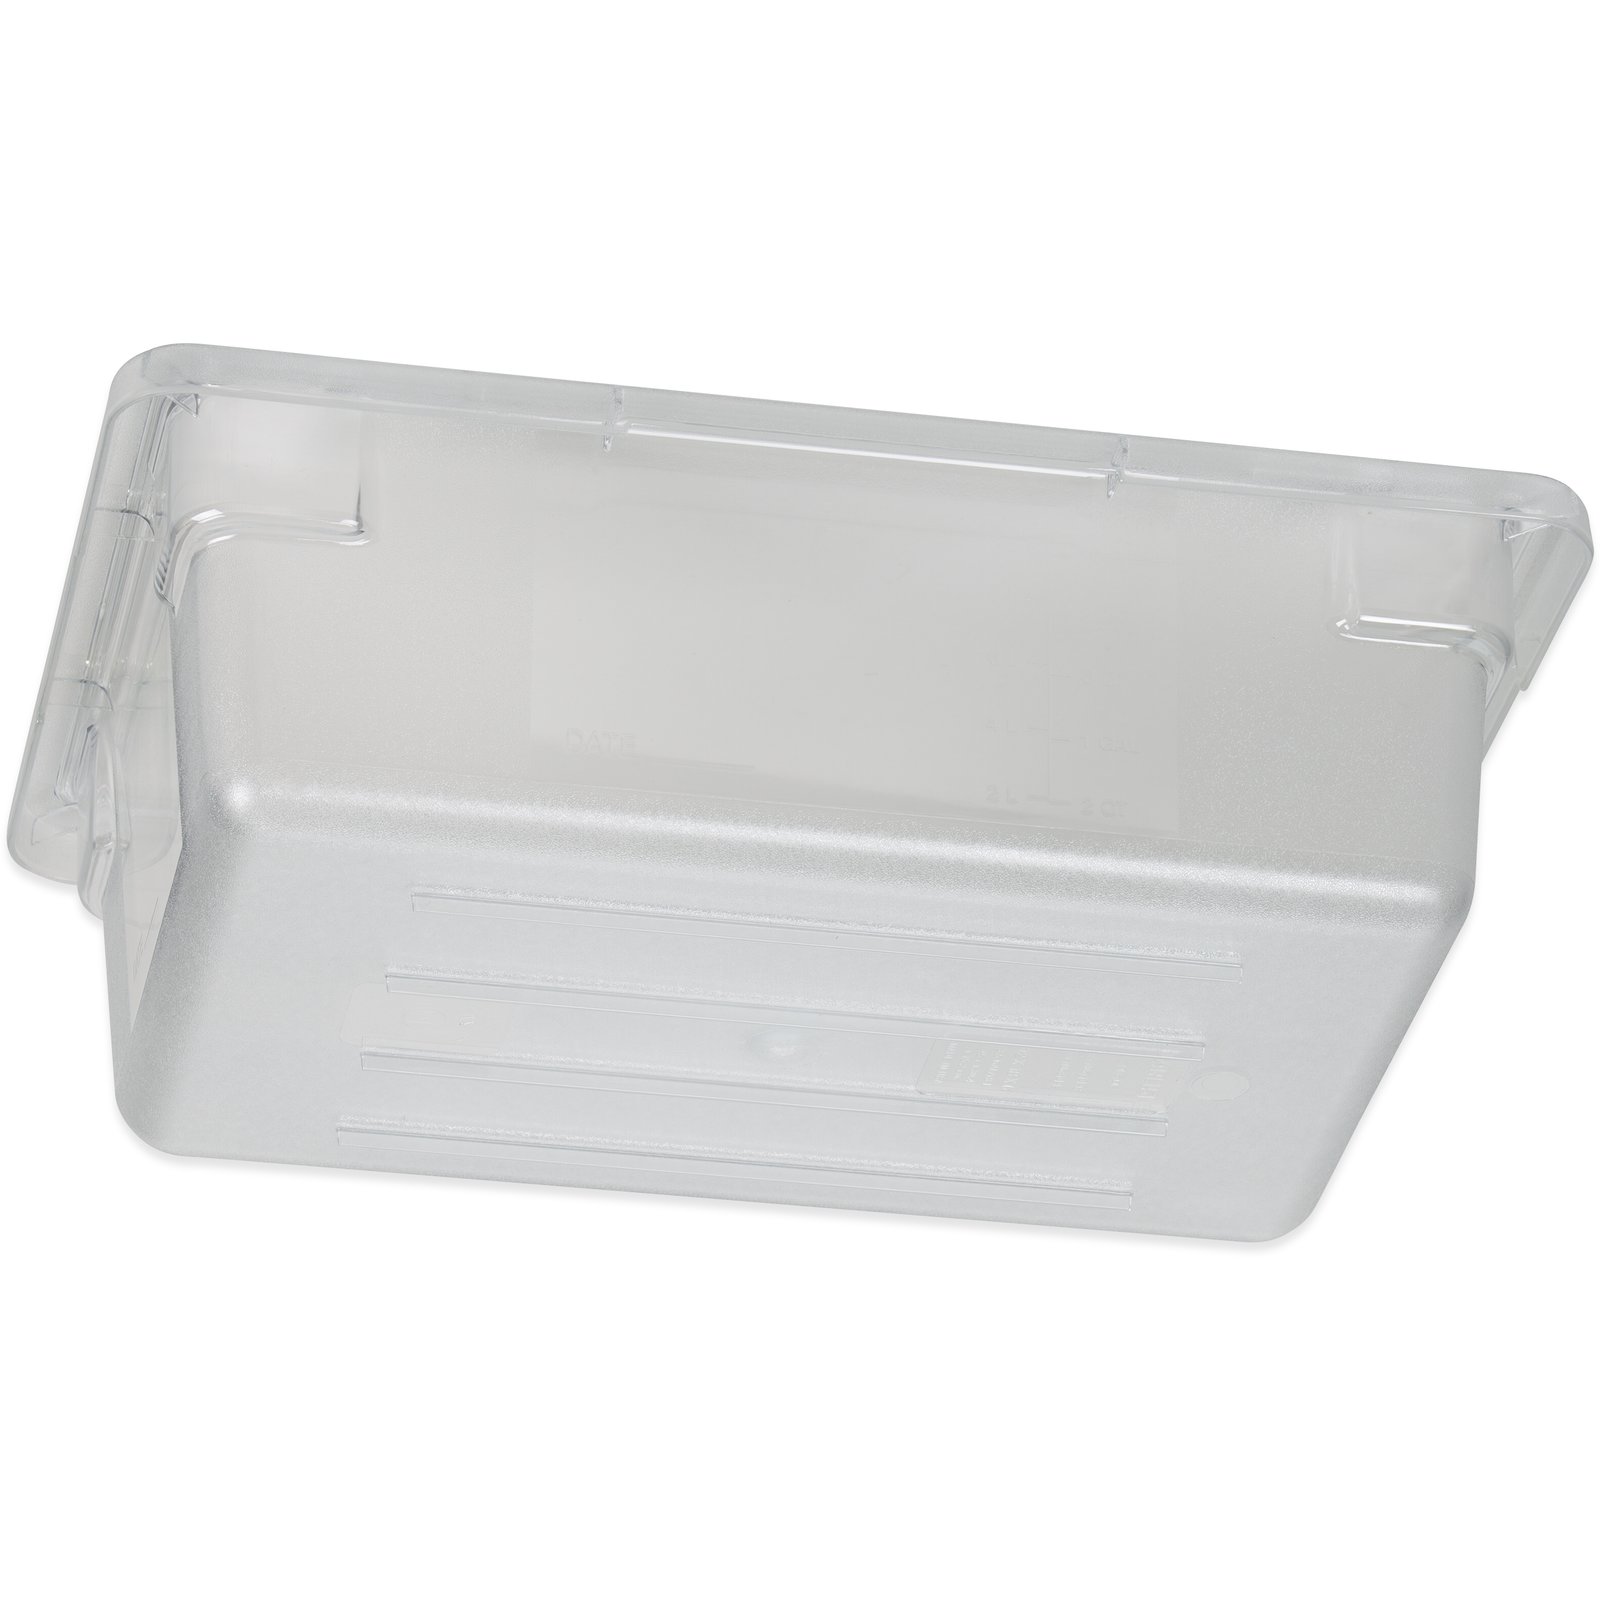 1061107 - StorPlus™ Polycarbonate Food Storage Container 3.5 gal - Clear